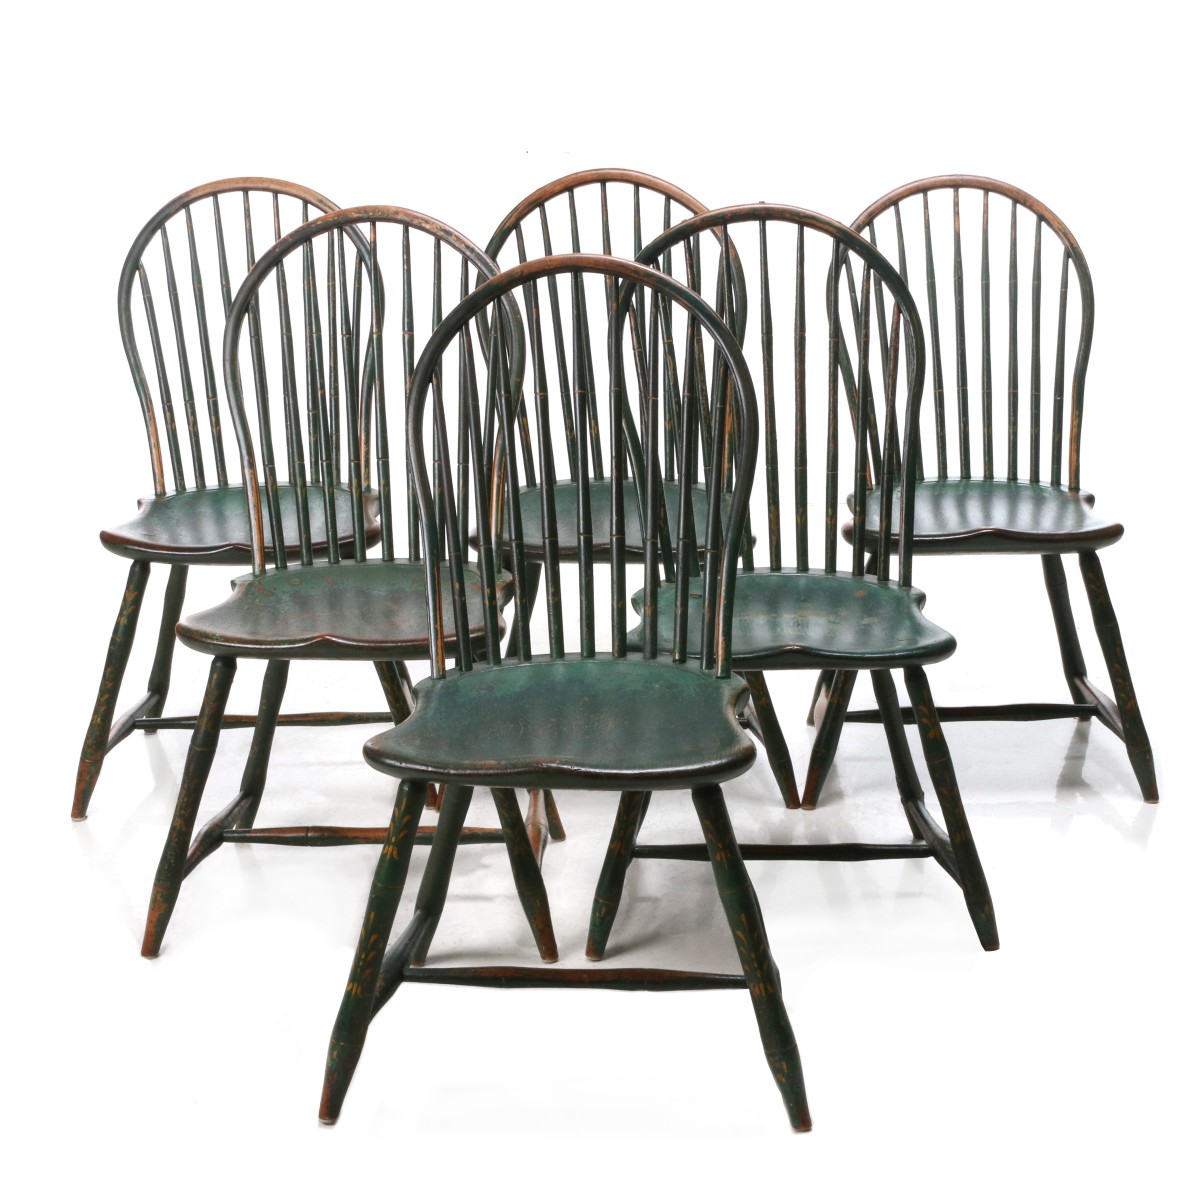 A VERY GOOD SET OF PAINT DECORATED 18C. WINDSOR CHAIRS